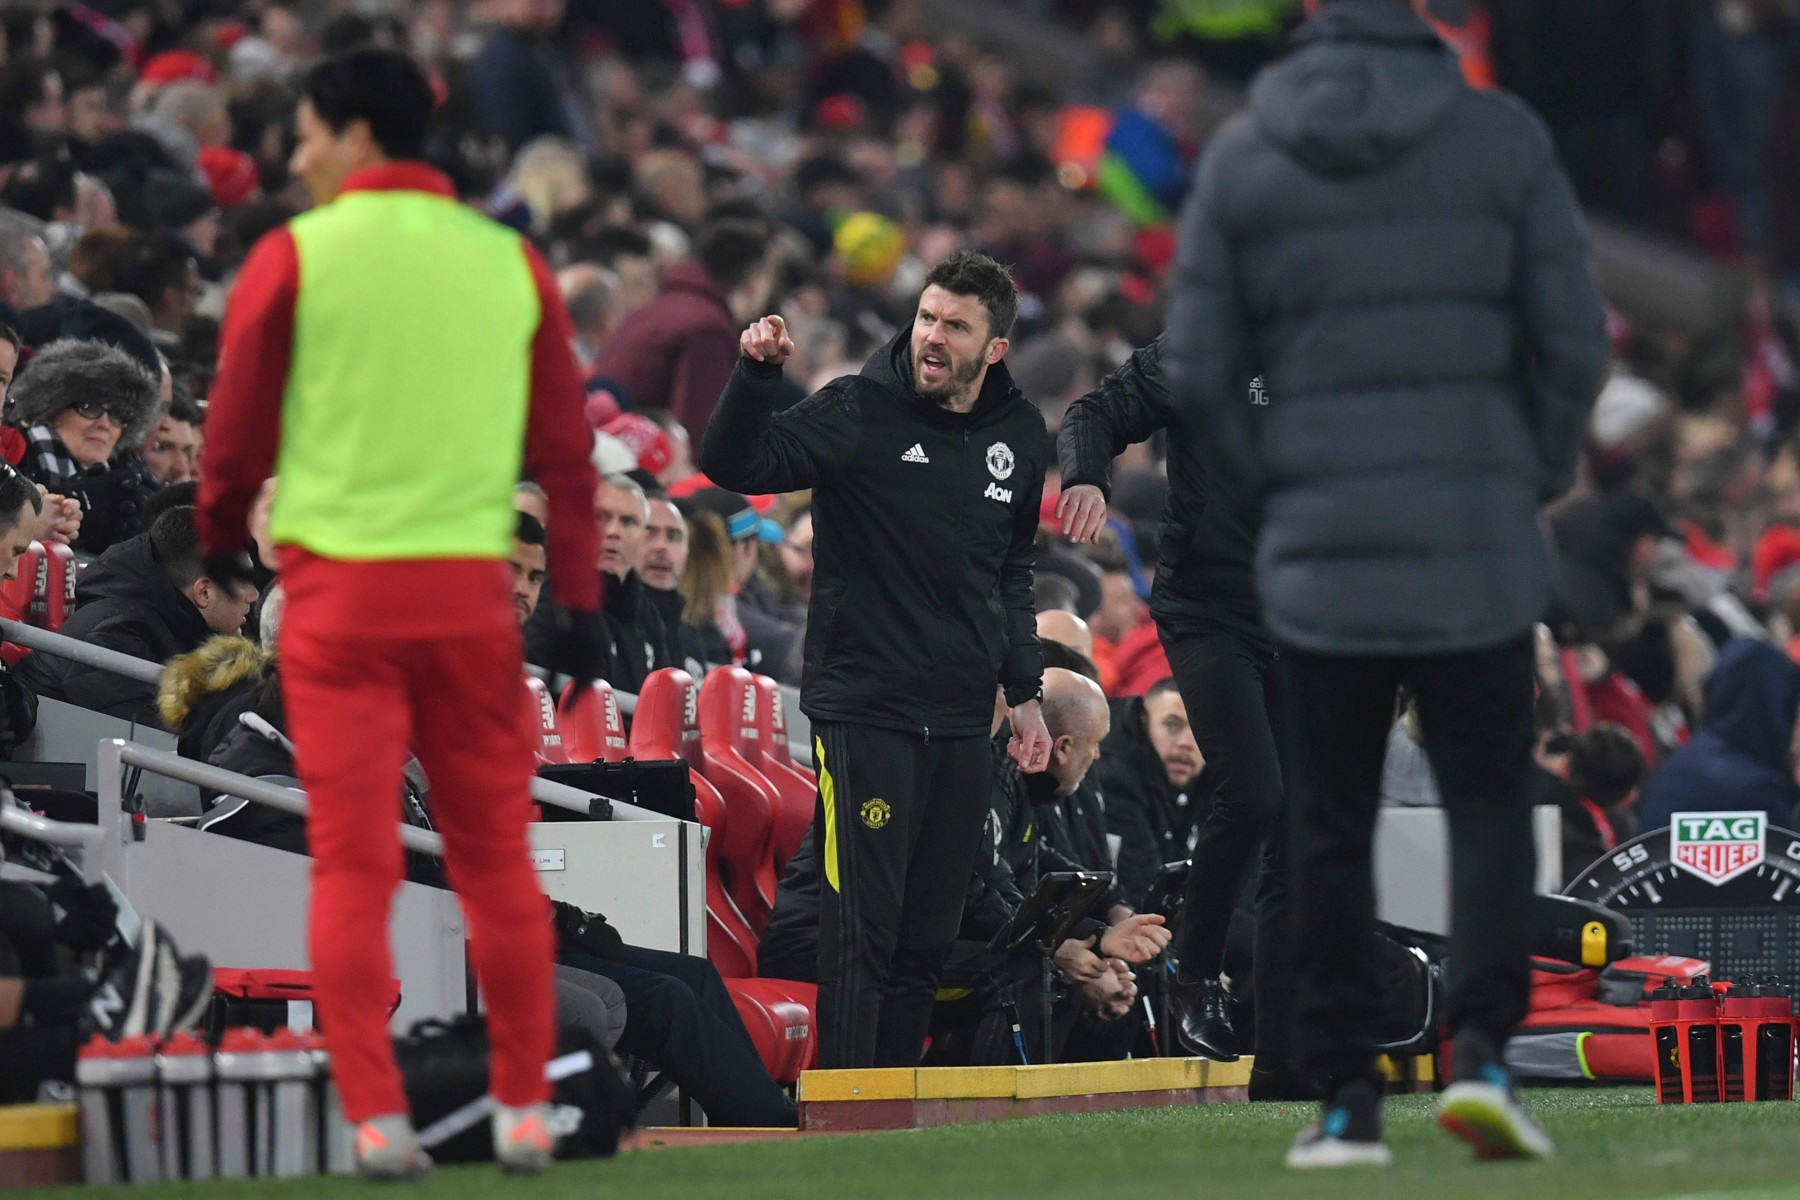 , Furious Michael Carrick clashes with Liverpool fans at Anfield after moaning at referee from the Man Utd bench